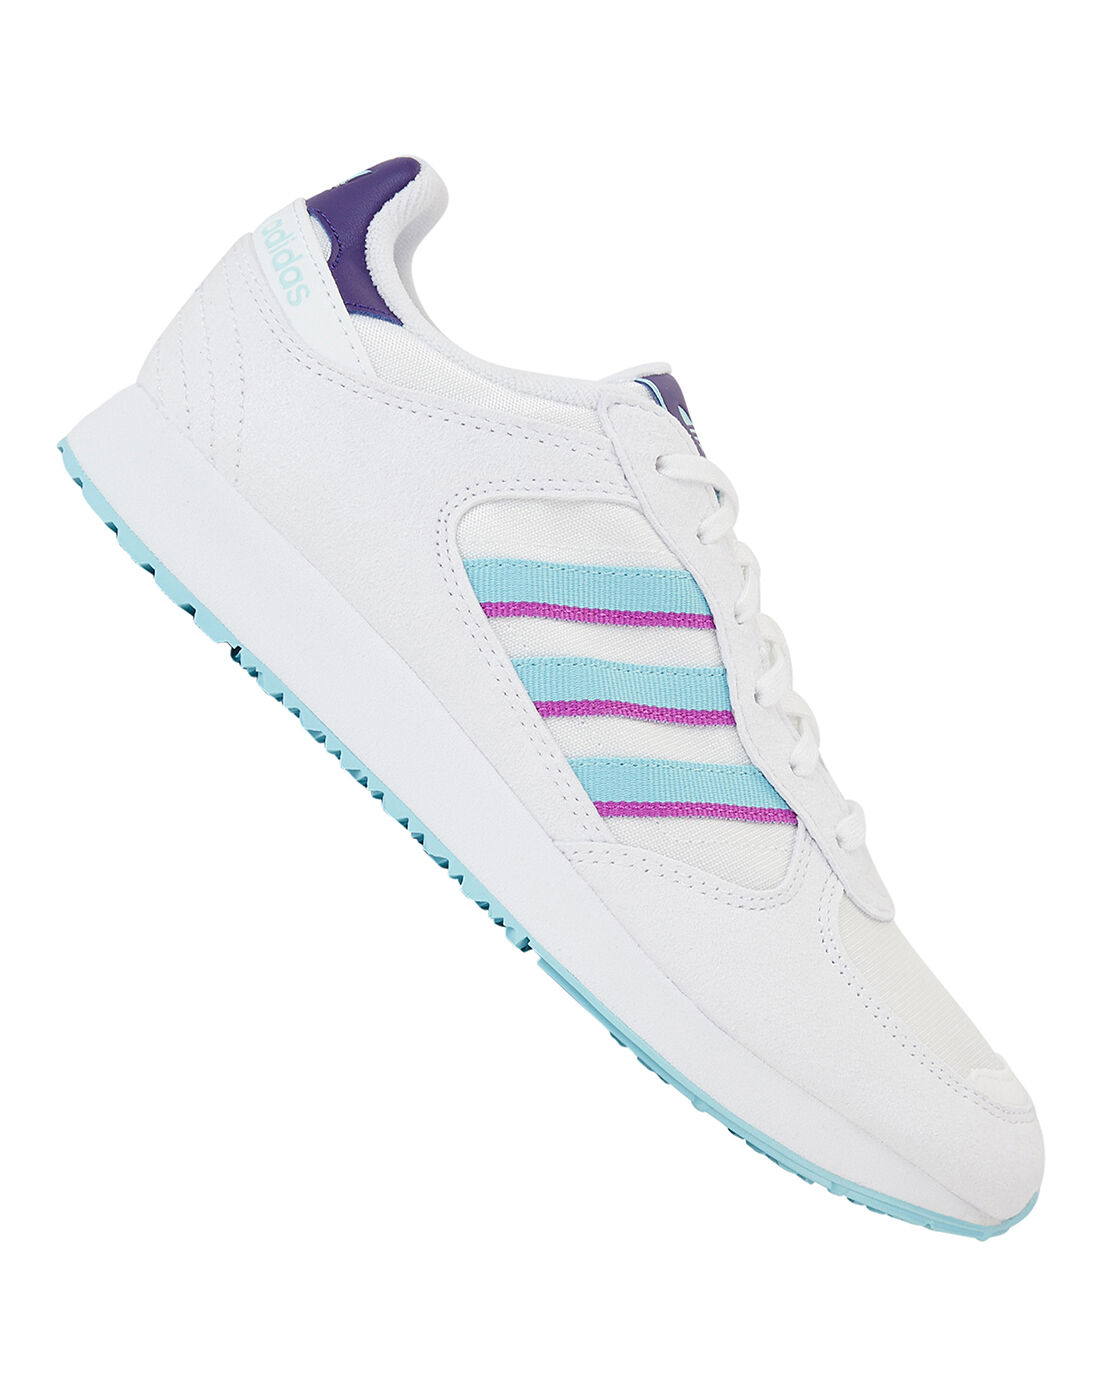 adidas holographic running shoes